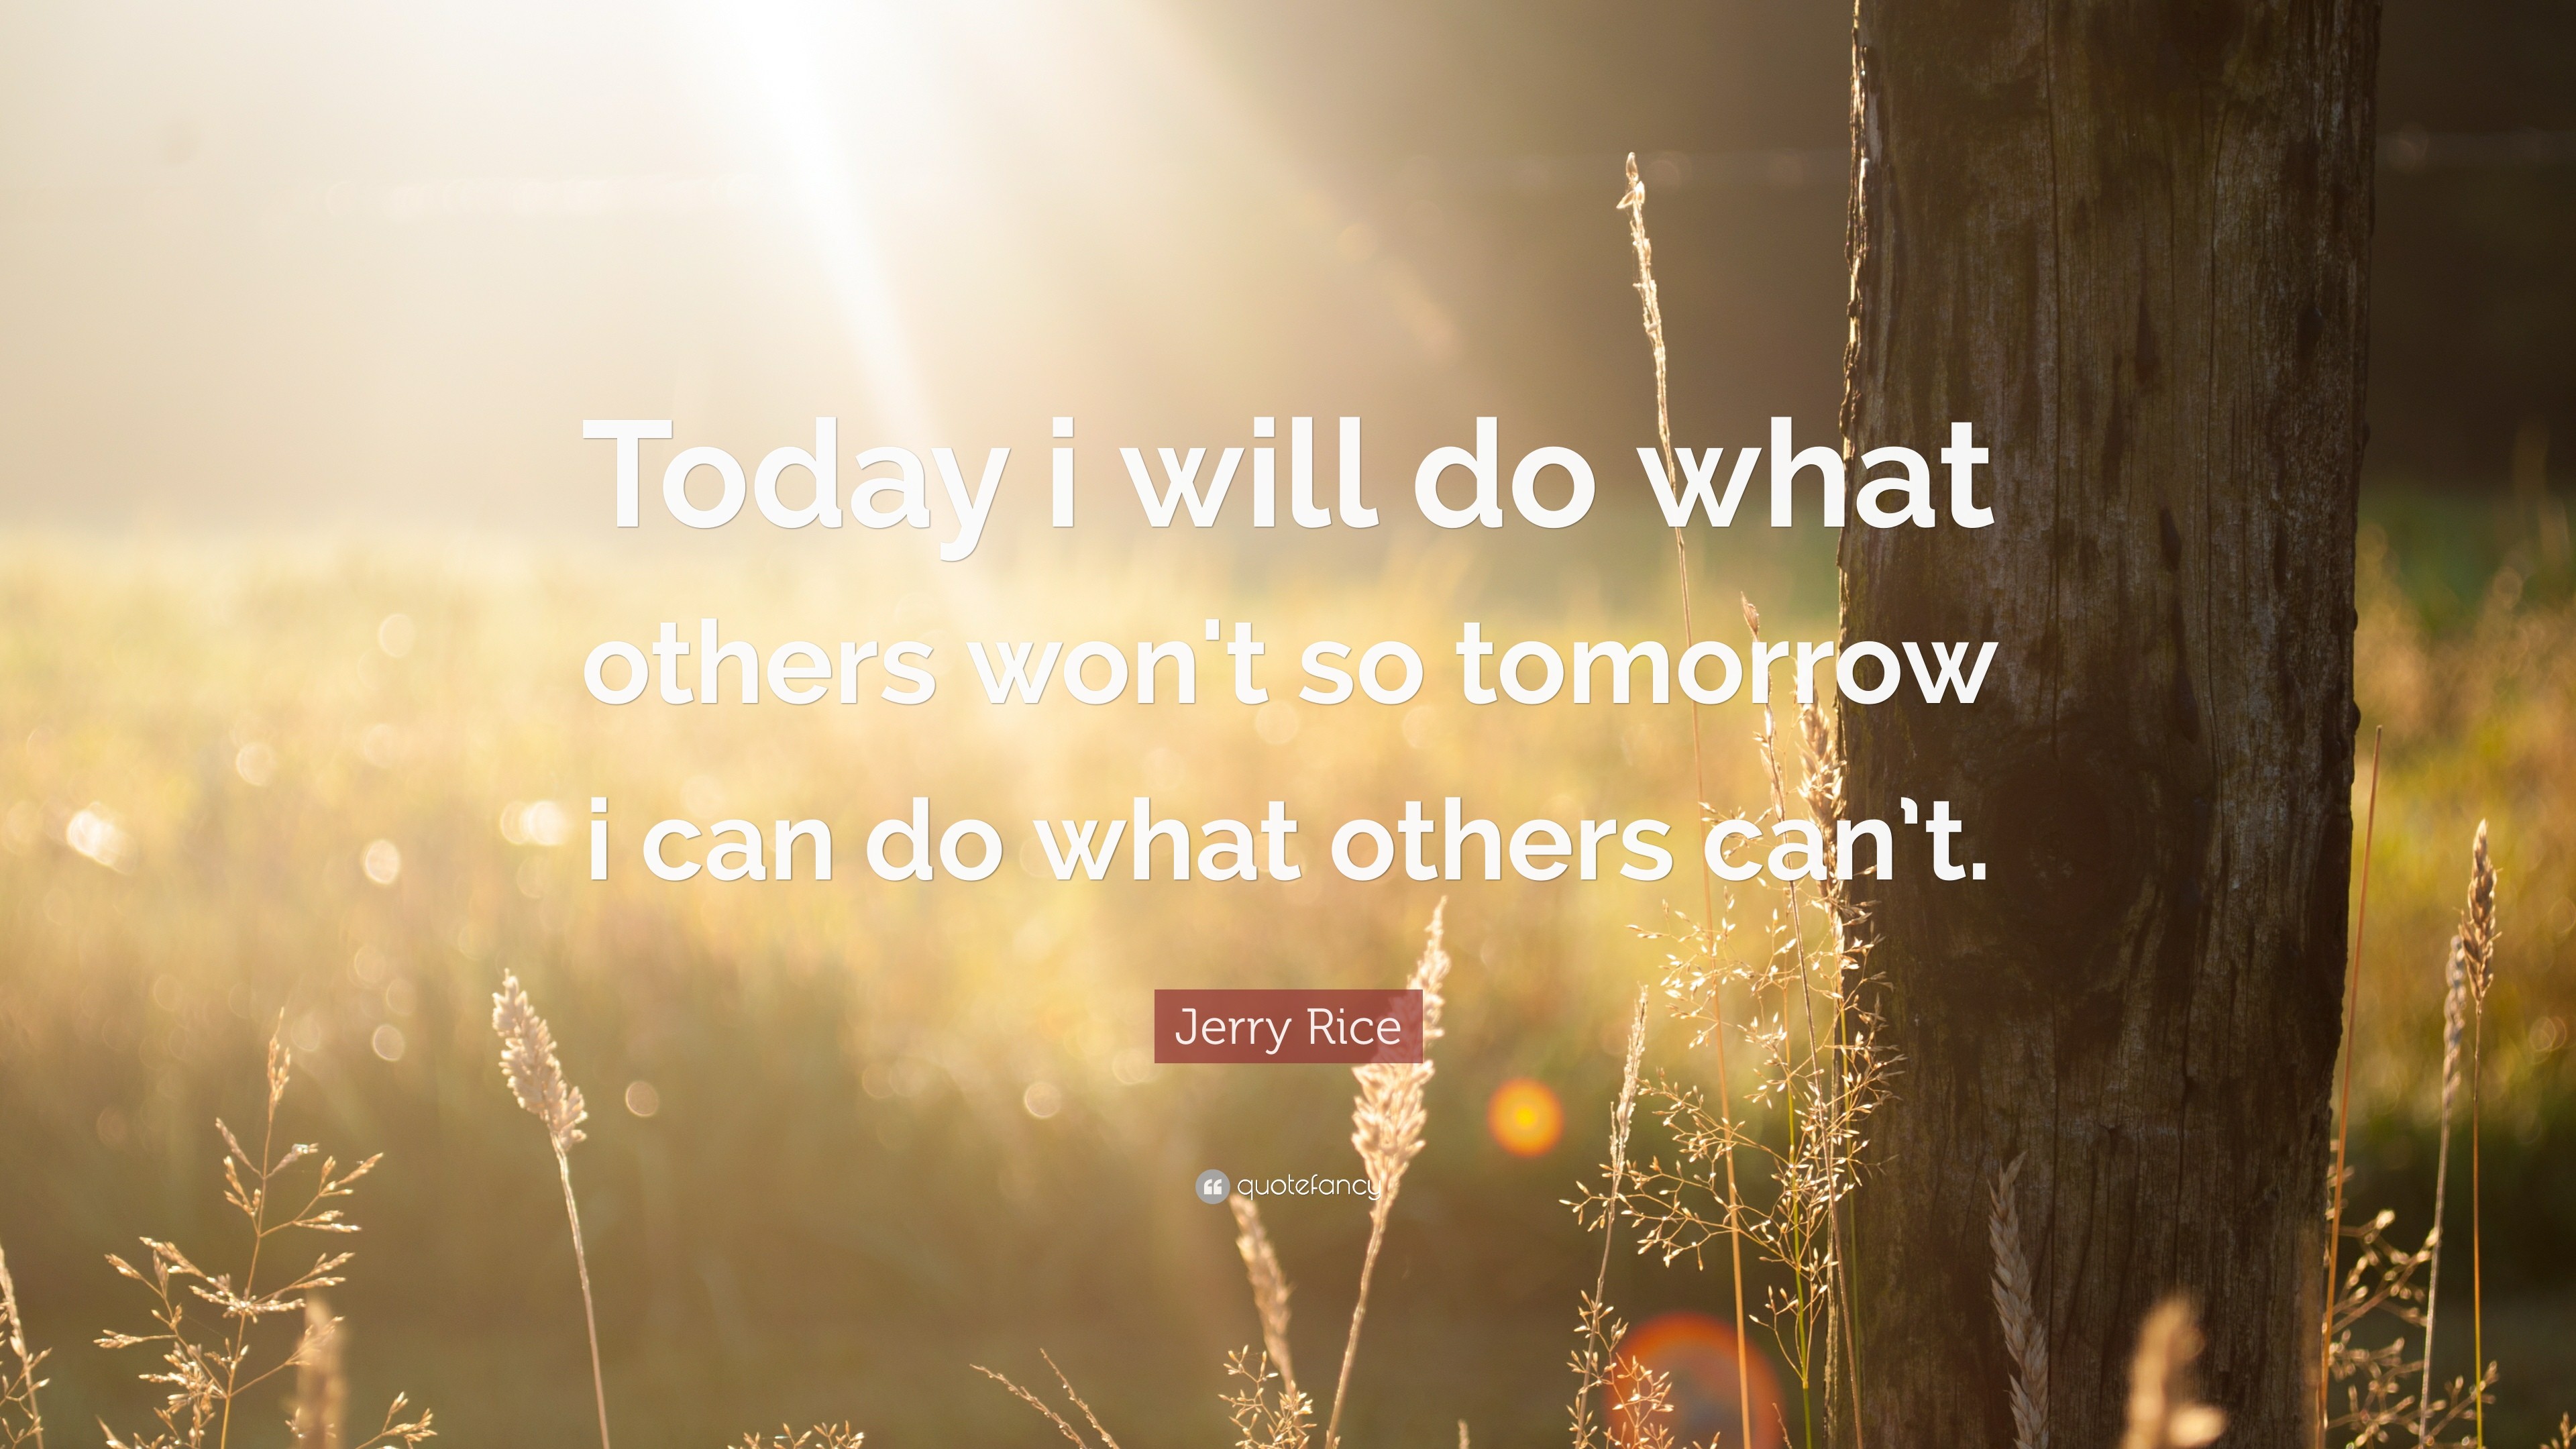 Jerry Rice Quote: “Today i will do what others won't so tomorrow